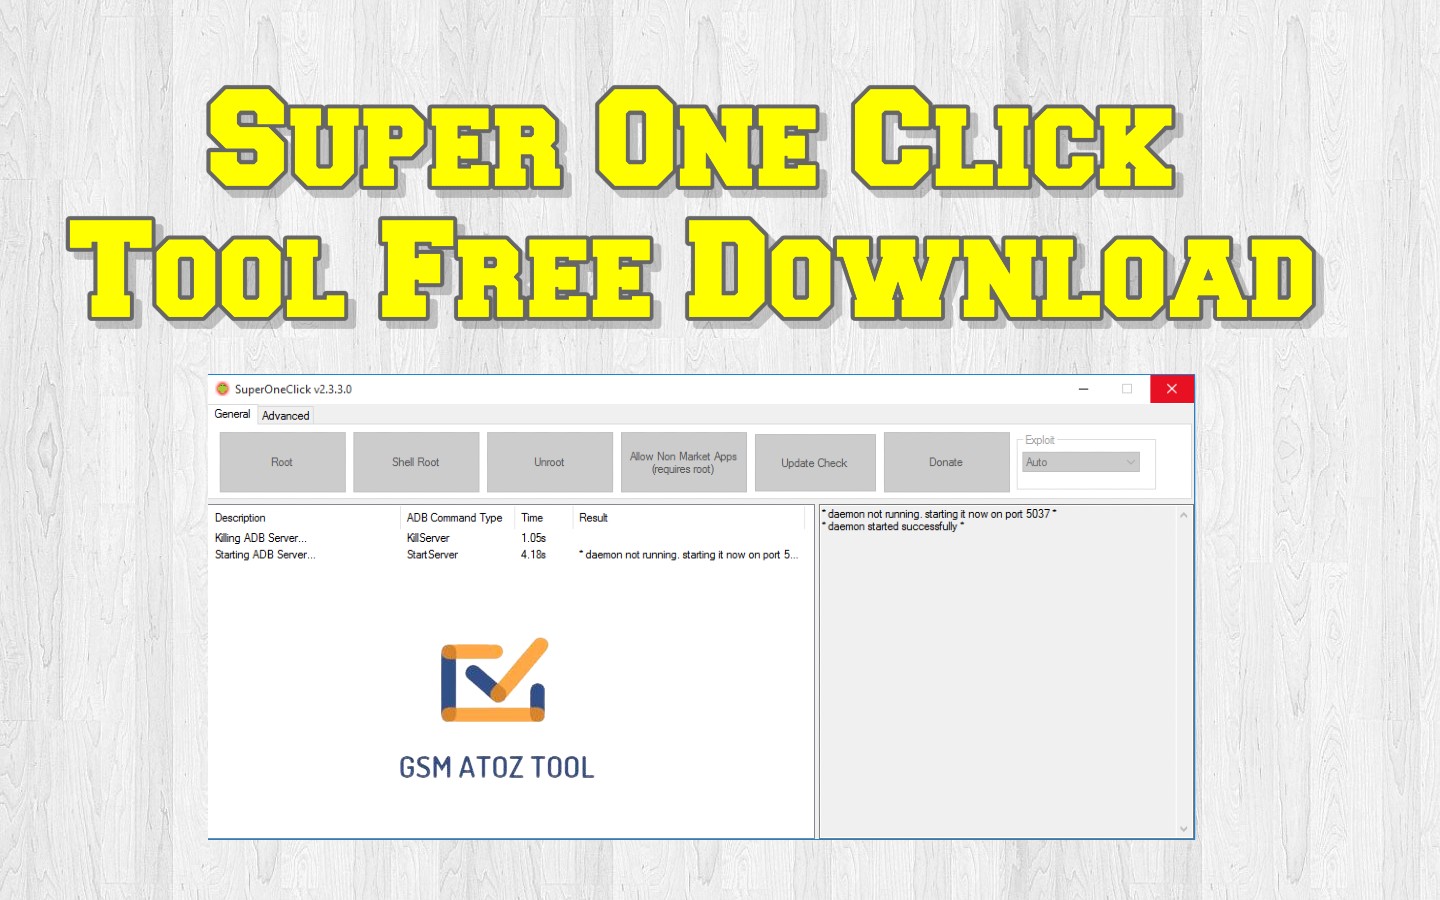 Super One Click 2.3.3 Tool Free Download